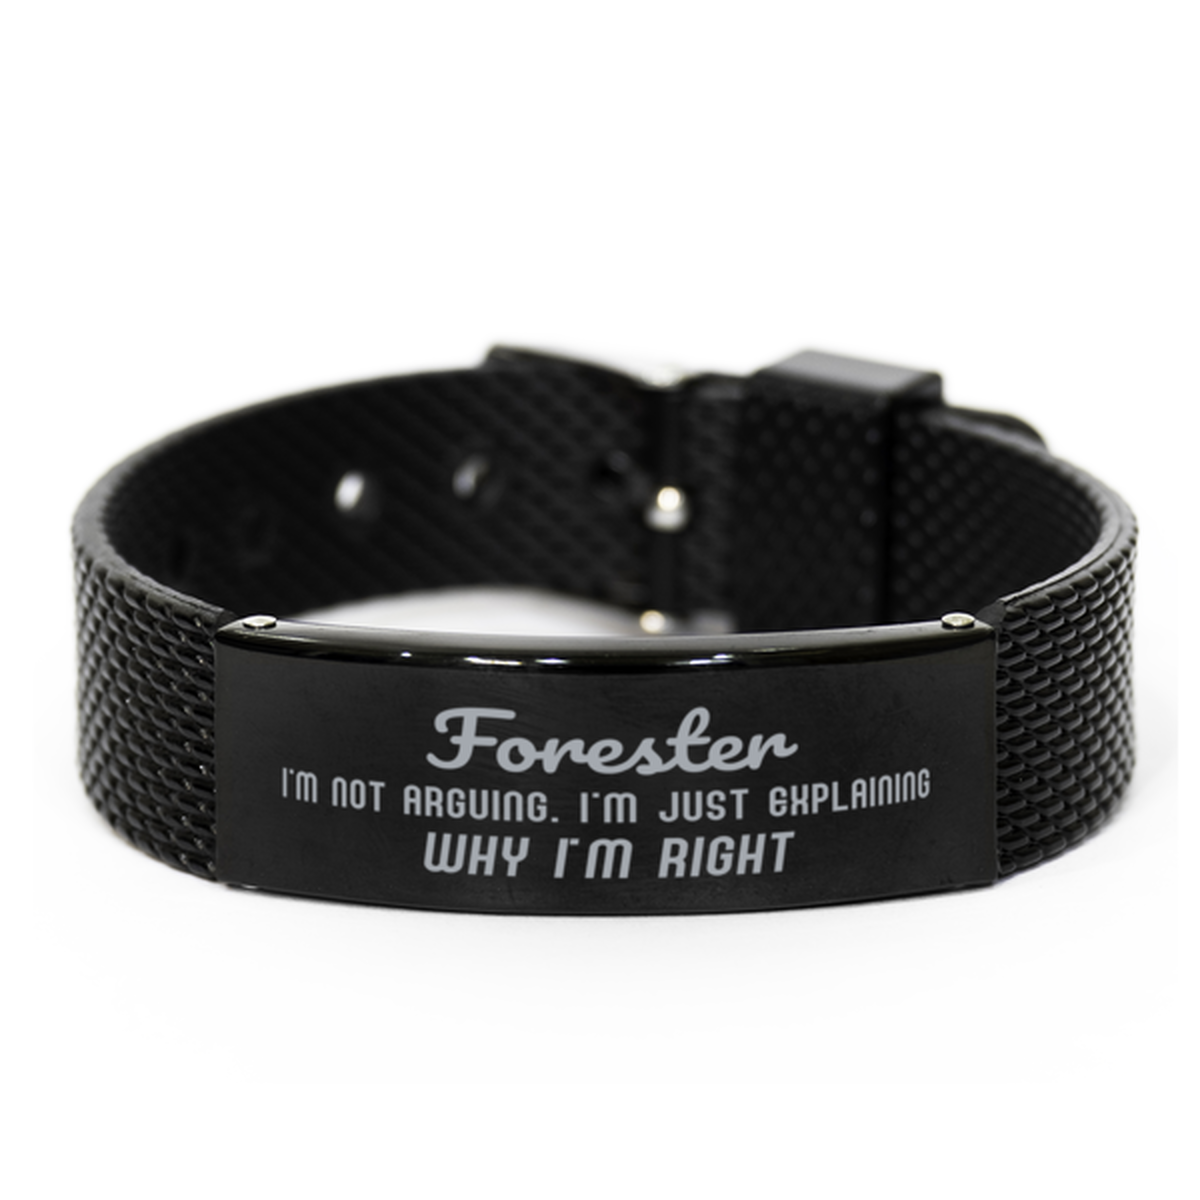 Forester I'm not Arguing. I'm Just Explaining Why I'm RIGHT Black Shark Mesh Bracelet, Funny Saying Quote Forester Gifts For Forester Graduation Birthday Christmas Gifts for Men Women Coworker